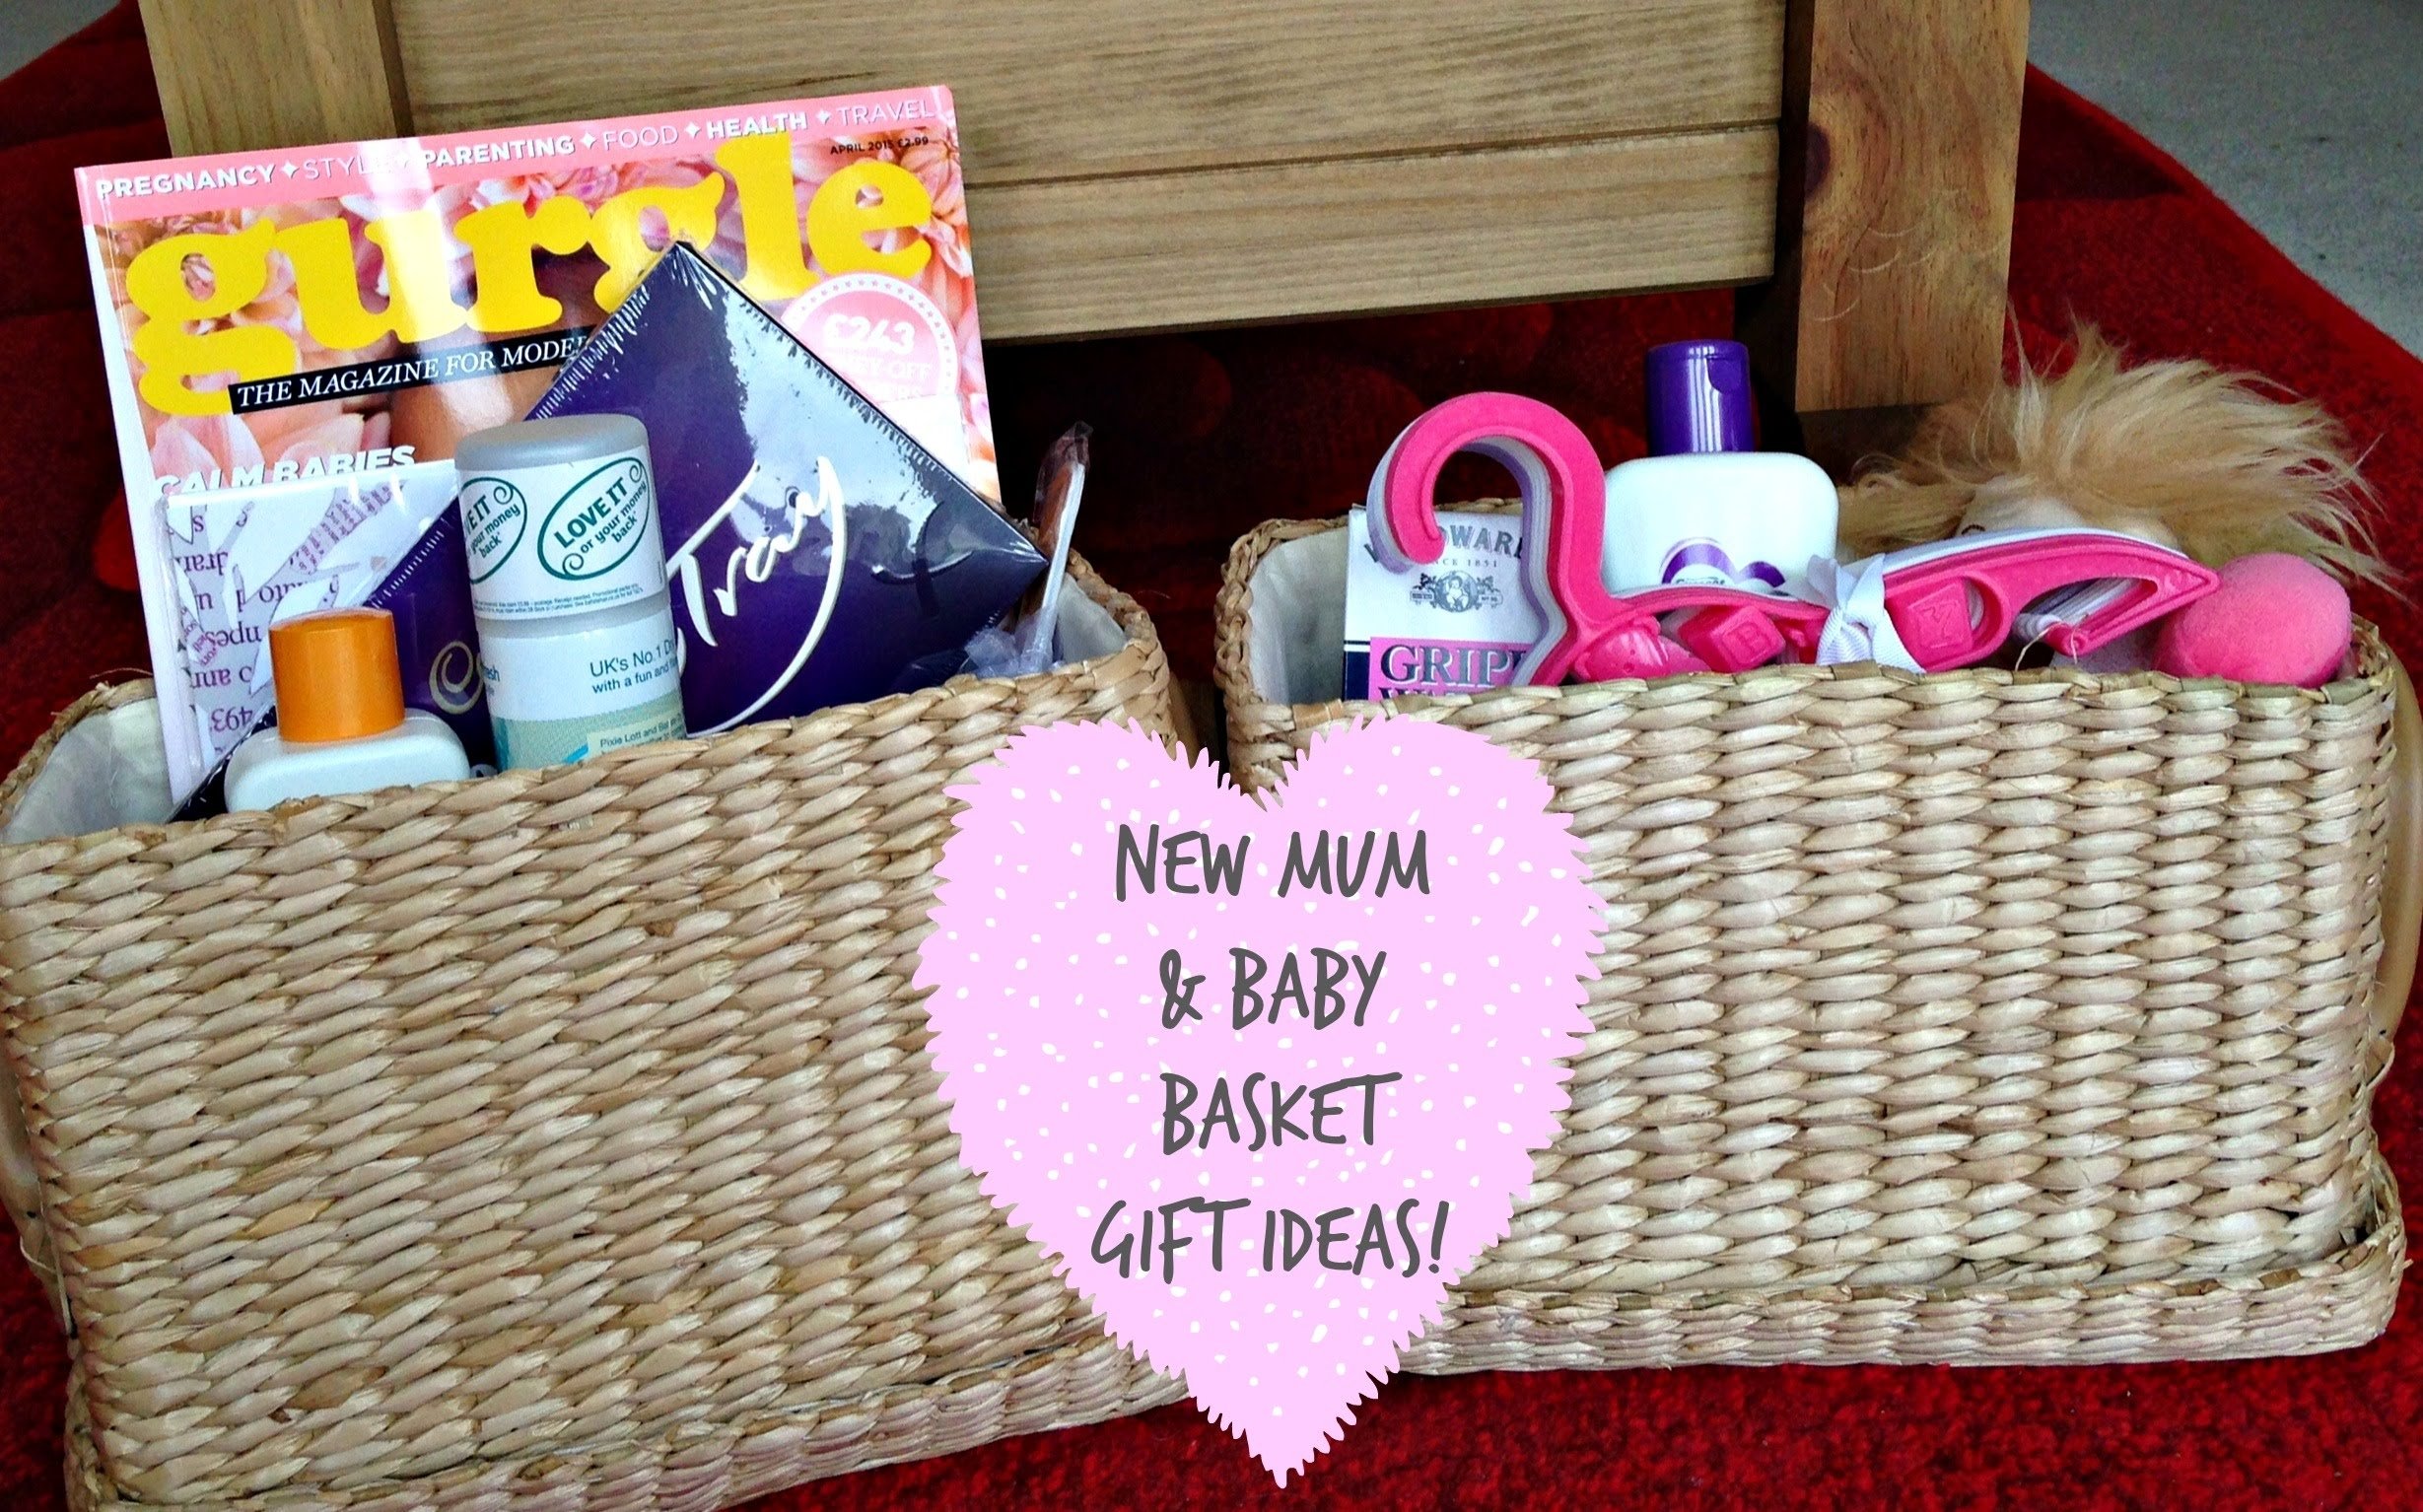 10 Most Recommended Gift Ideas For A New Mom new mum baby basket gift ideas kerry dyer youtube 5 2023